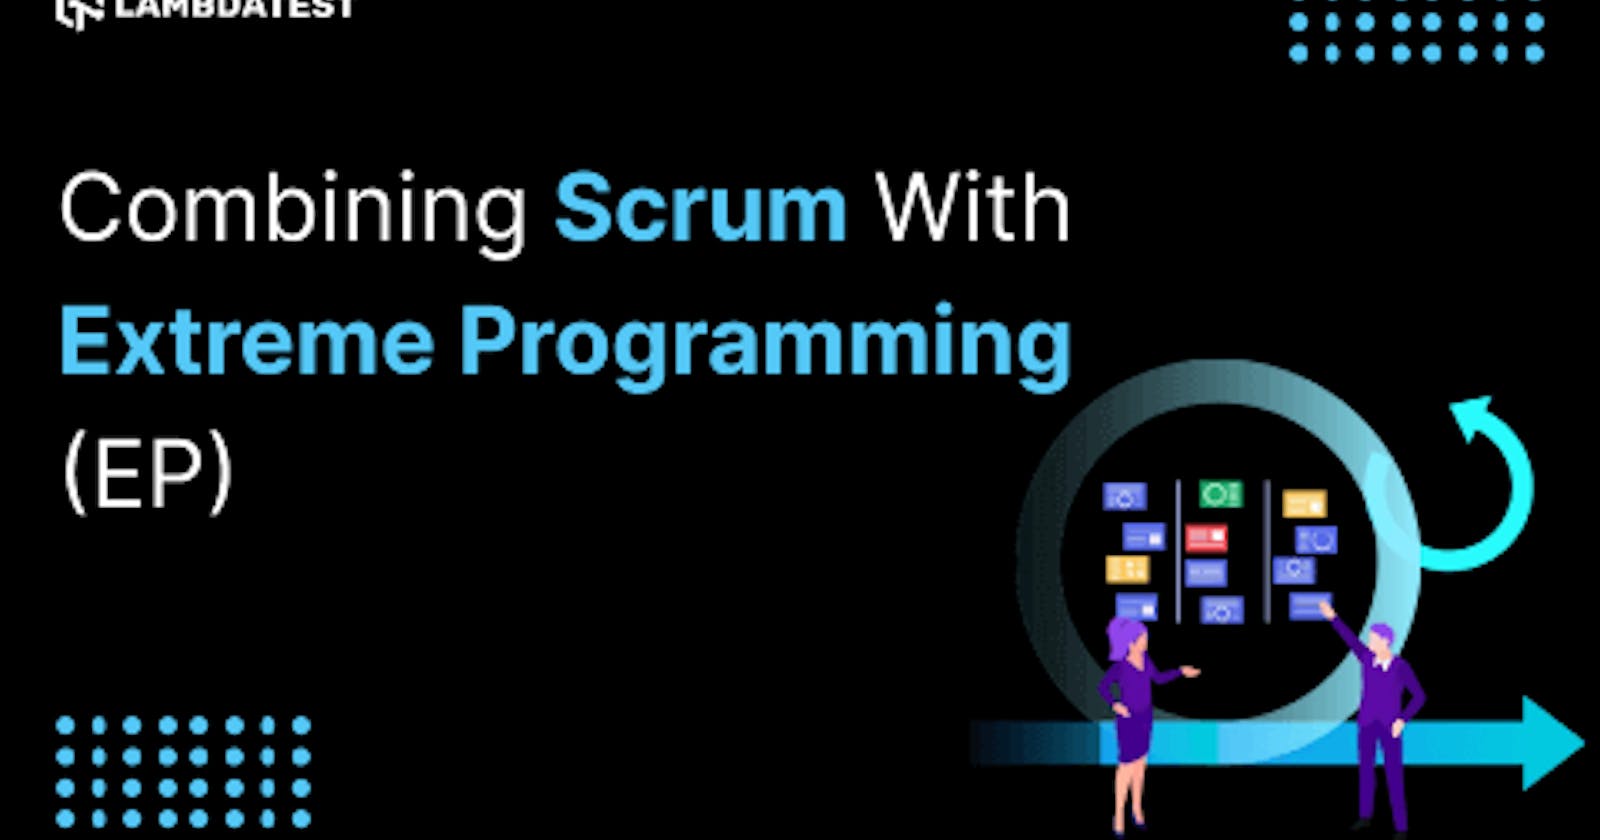 Combining Scrum with Extreme Programming (EP)